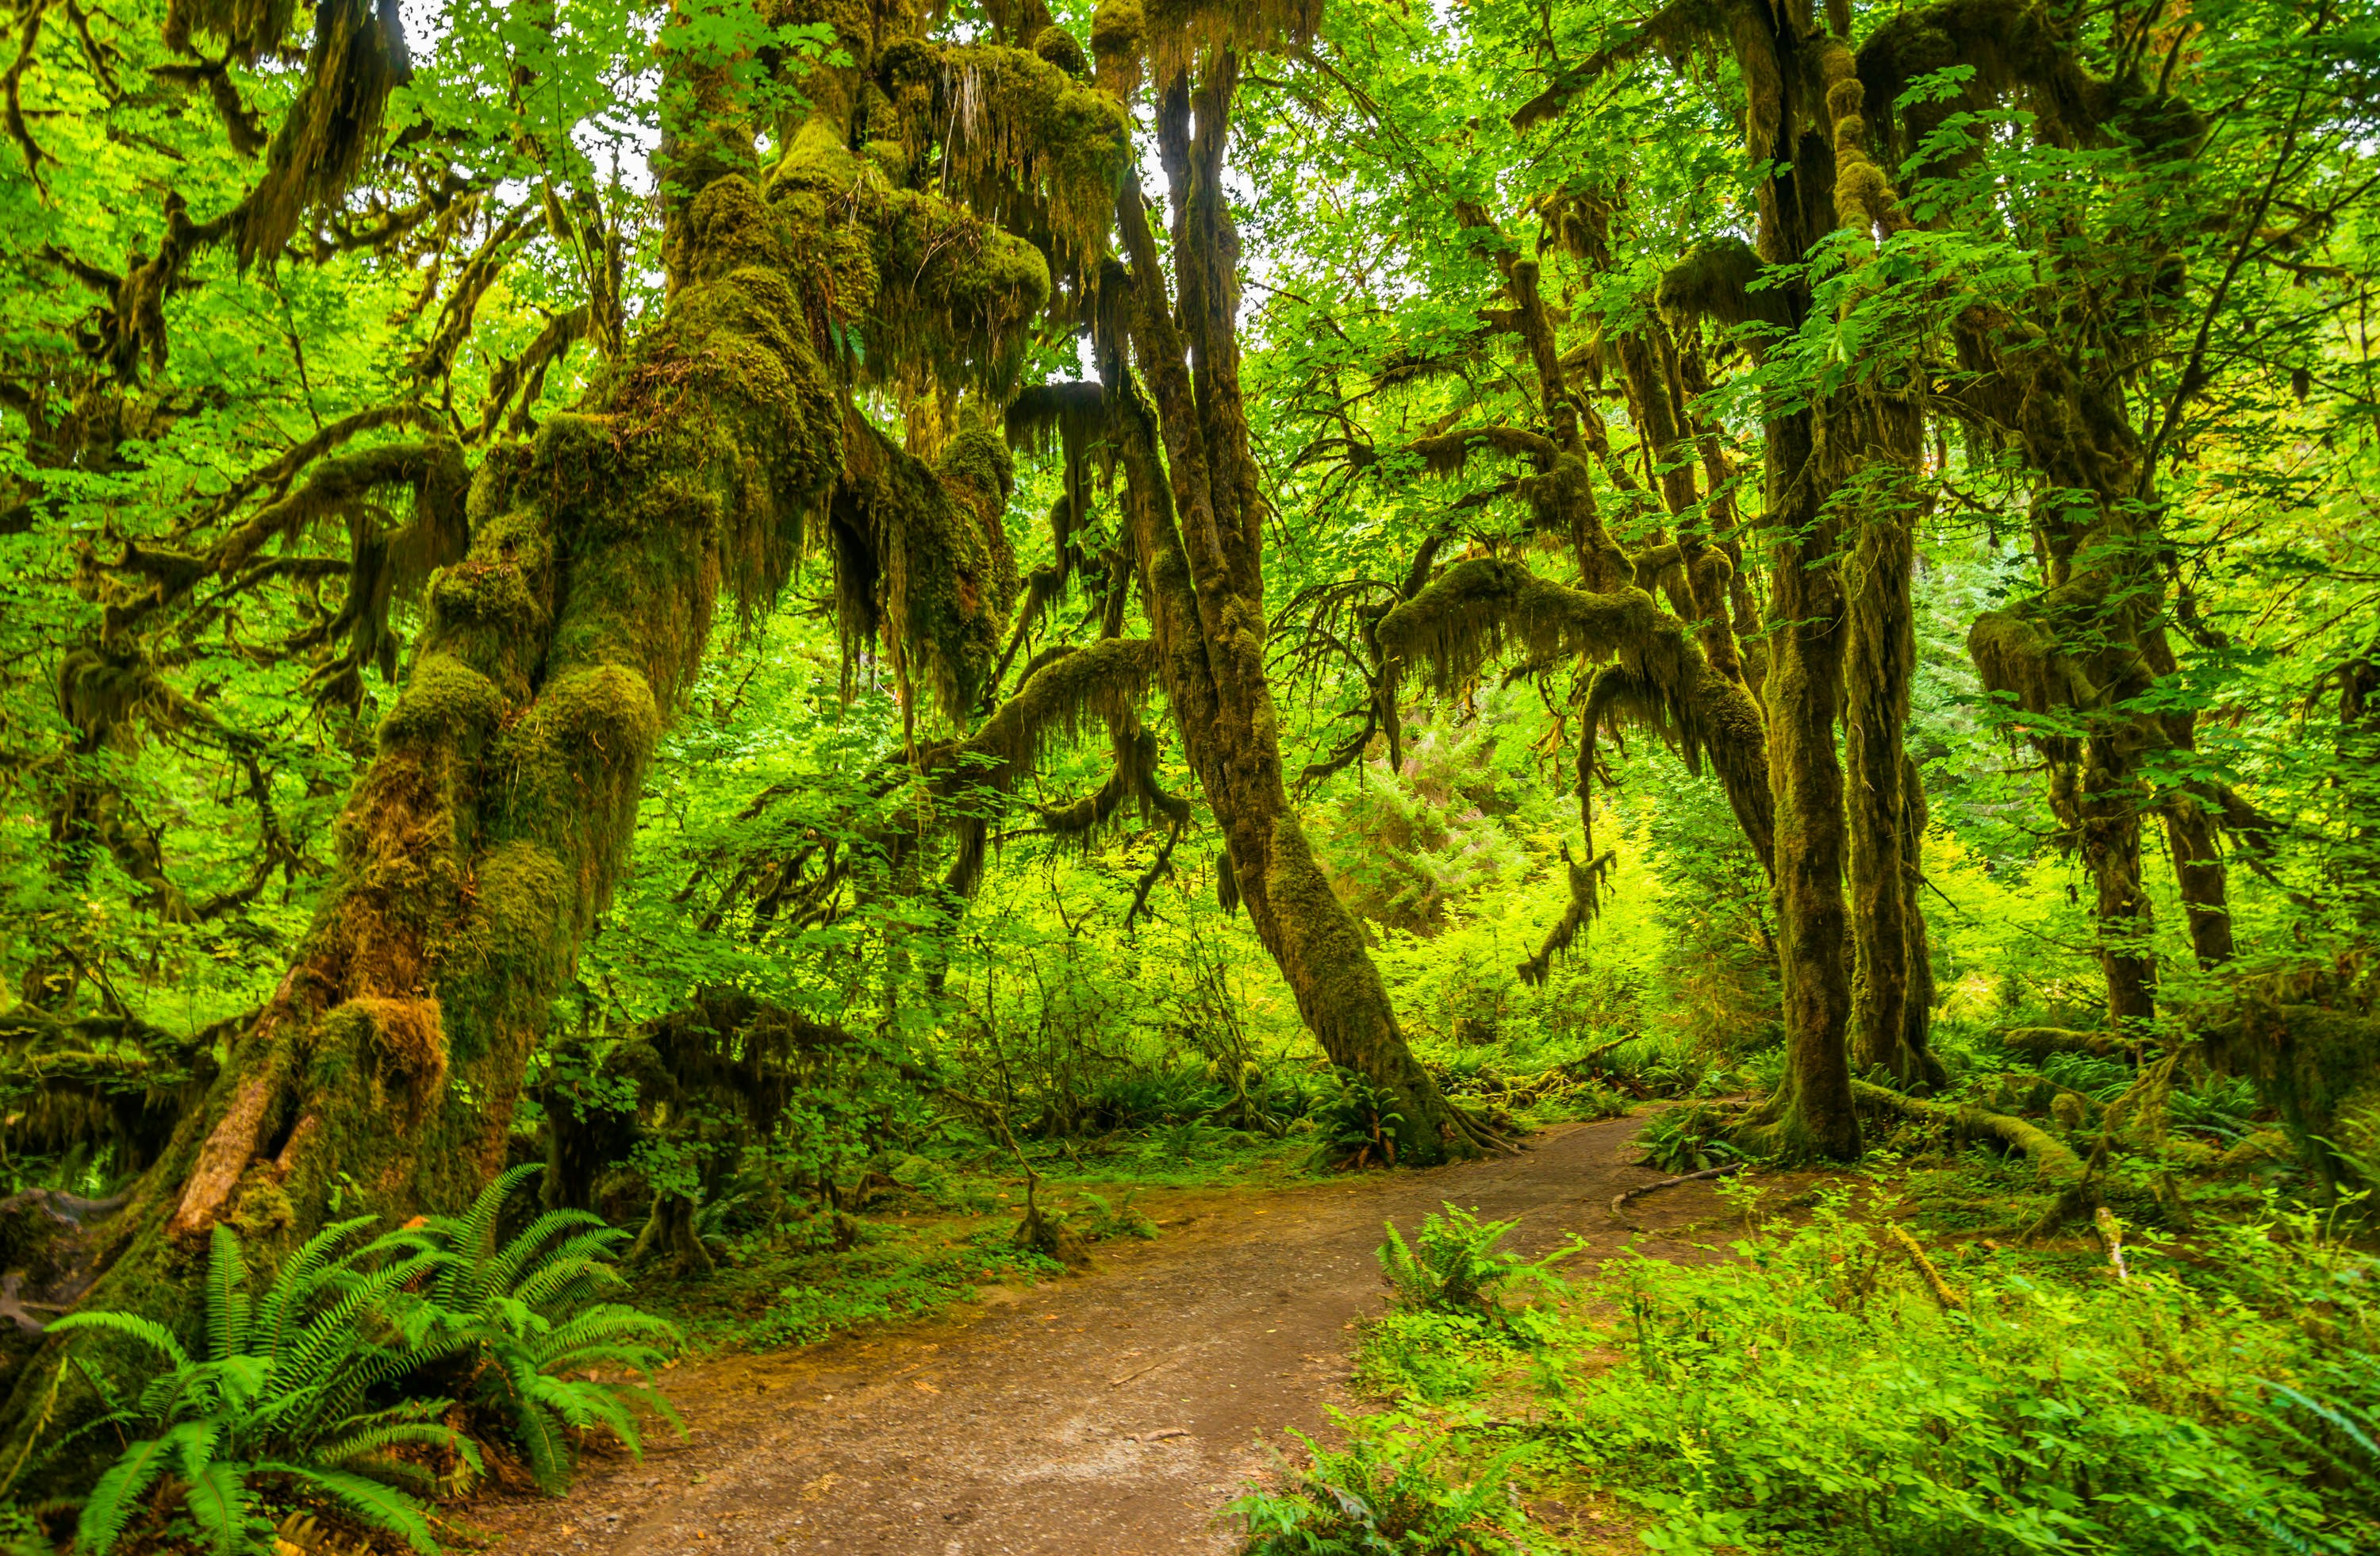 Moss covered trees at Hoh Rain Forest in Olympic National Park, Washington.